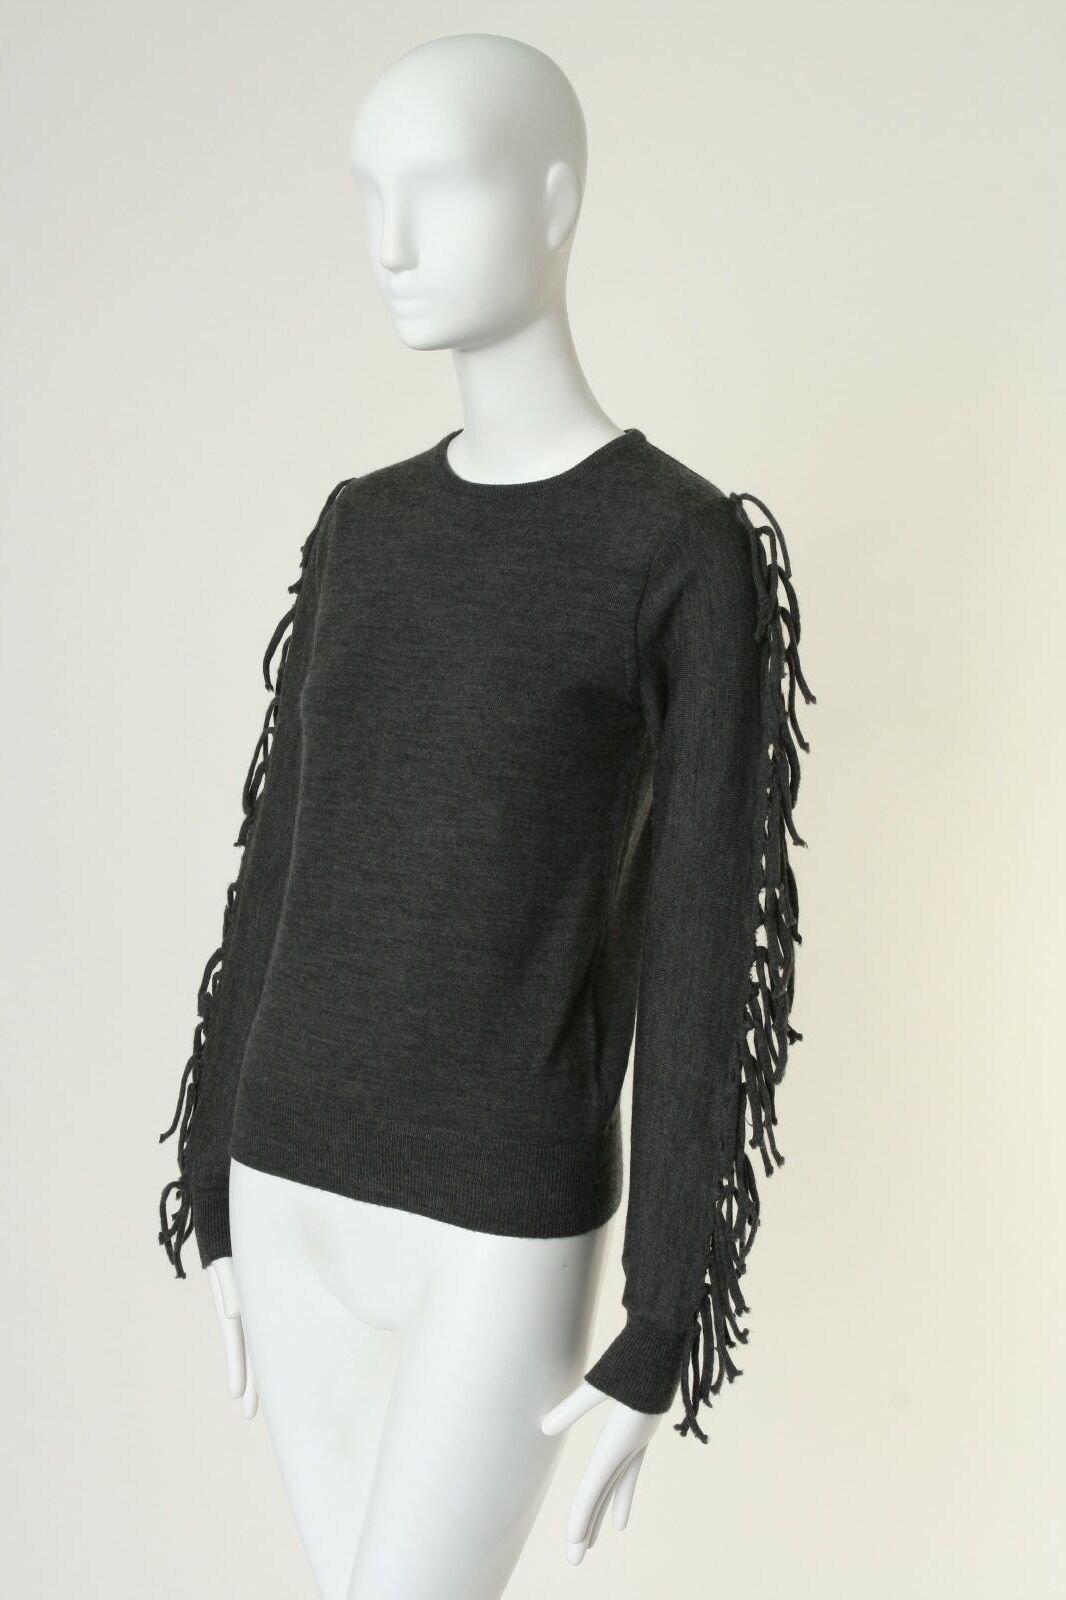 Black TOGA PULLA grey fringe tie sleeves wool knitted sweater pullover top S US4 JP1